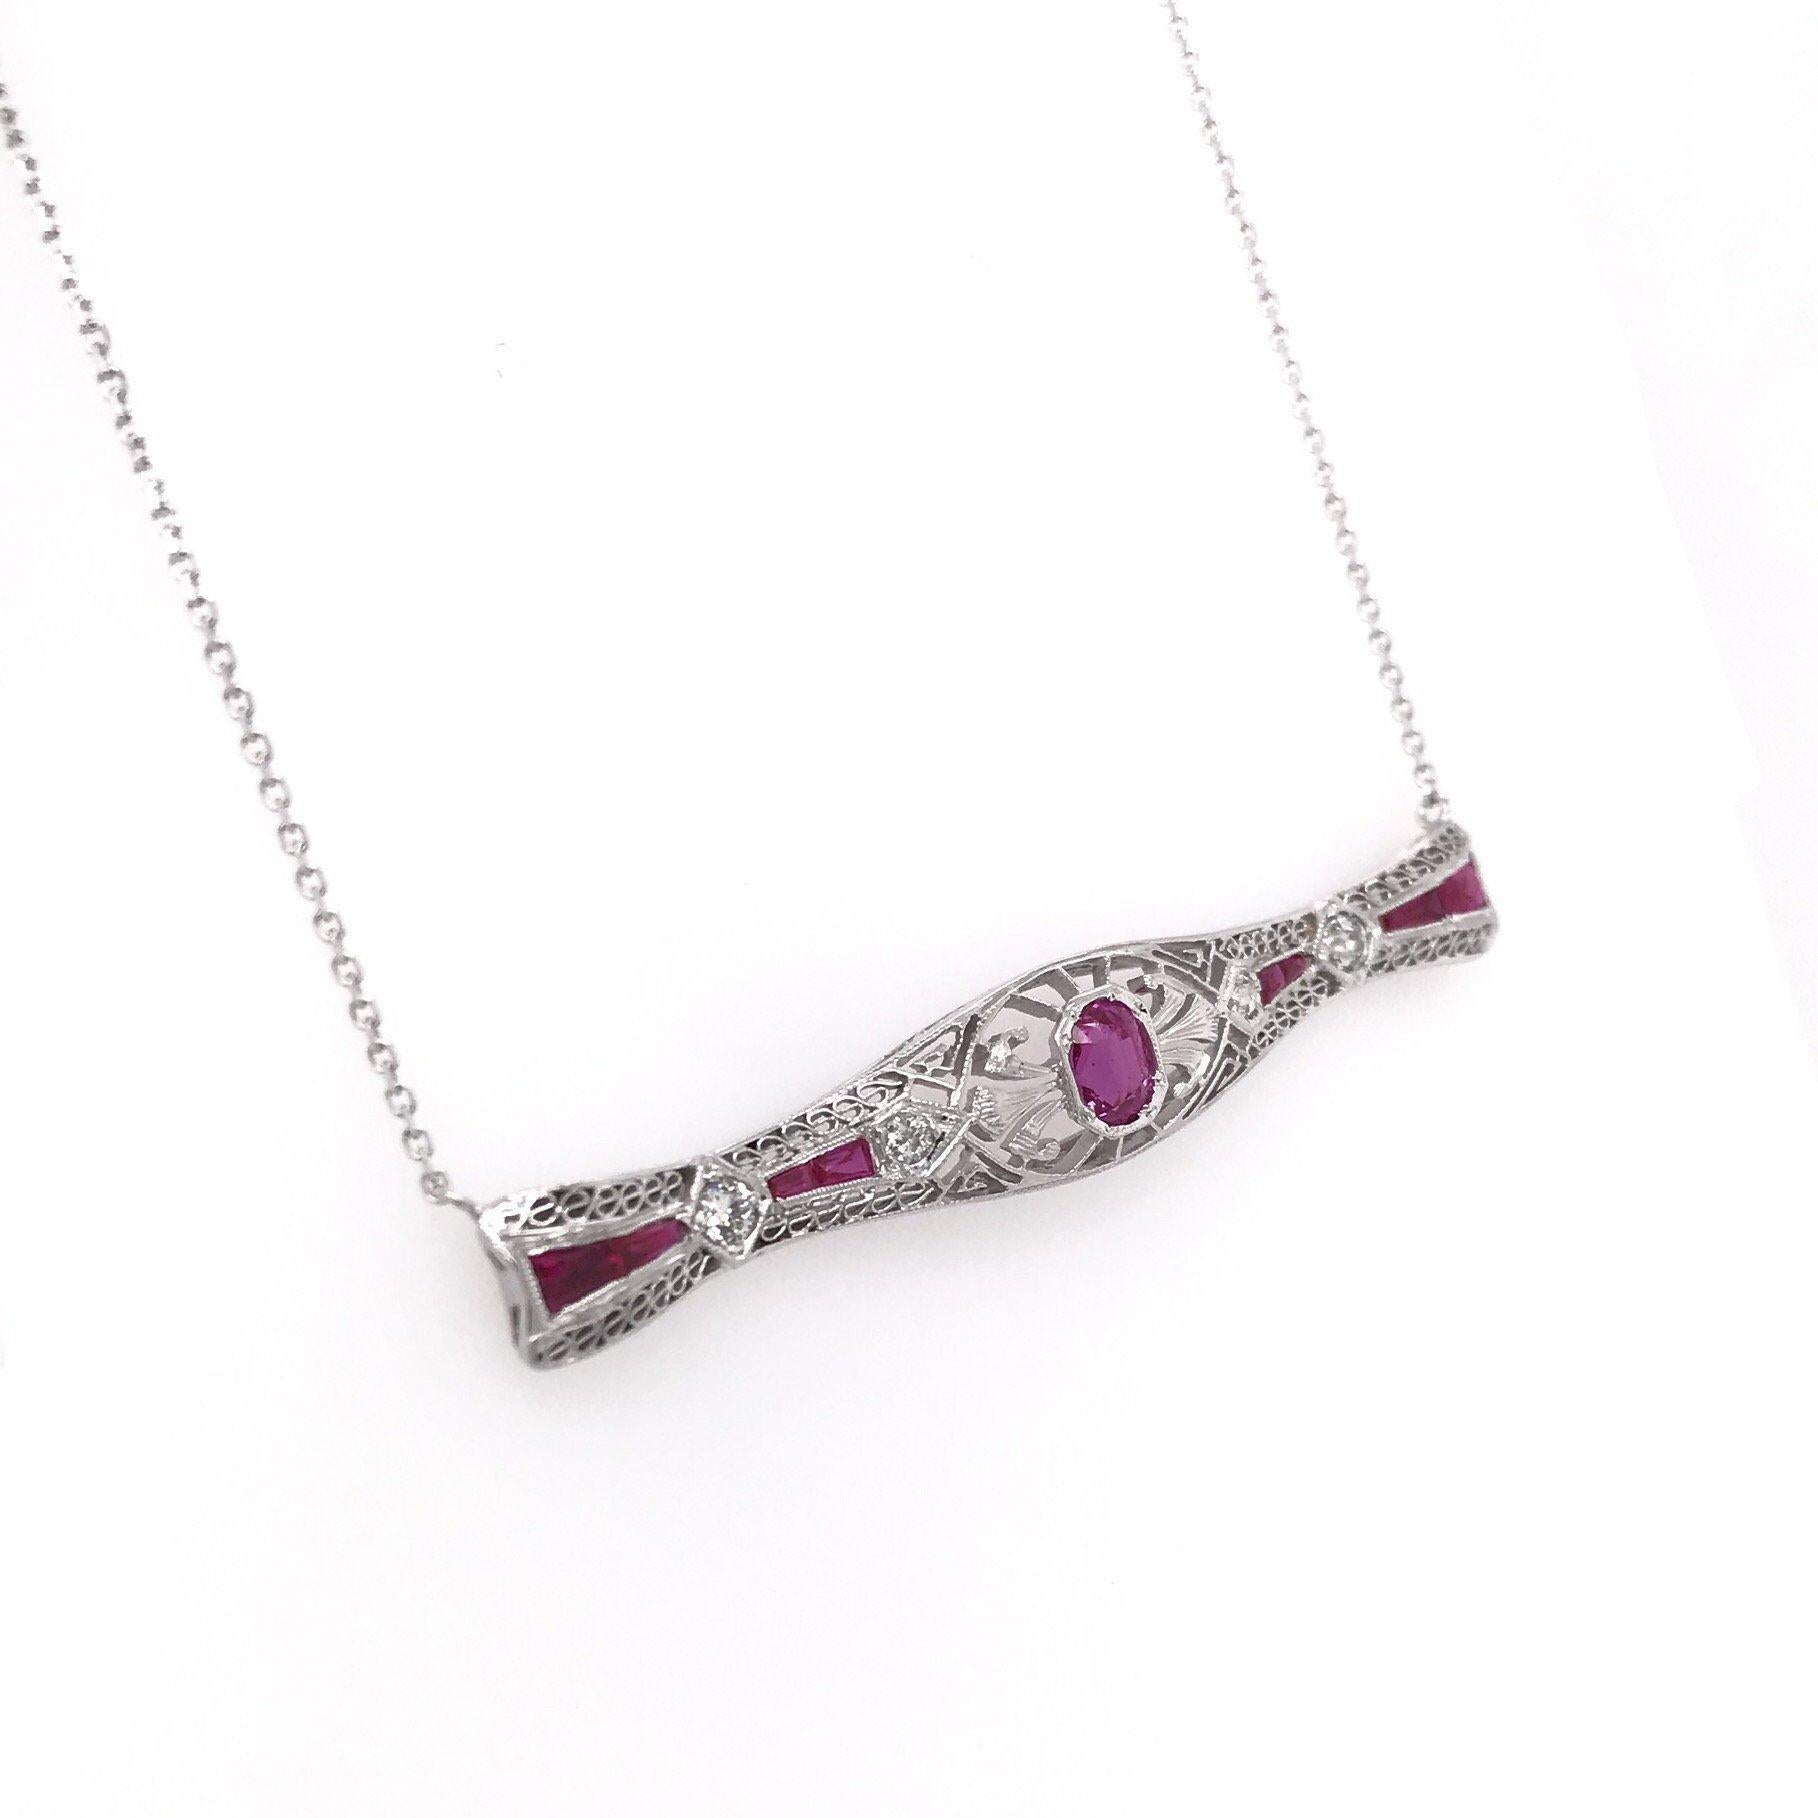 This piece is an antique revision made from reclaimed antique materials. This necklace was originally an antique bar pin (brooch) handcrafted sometime during the Art Deco design period ( 1920-1940 ). The platinum bar pin features a central antique